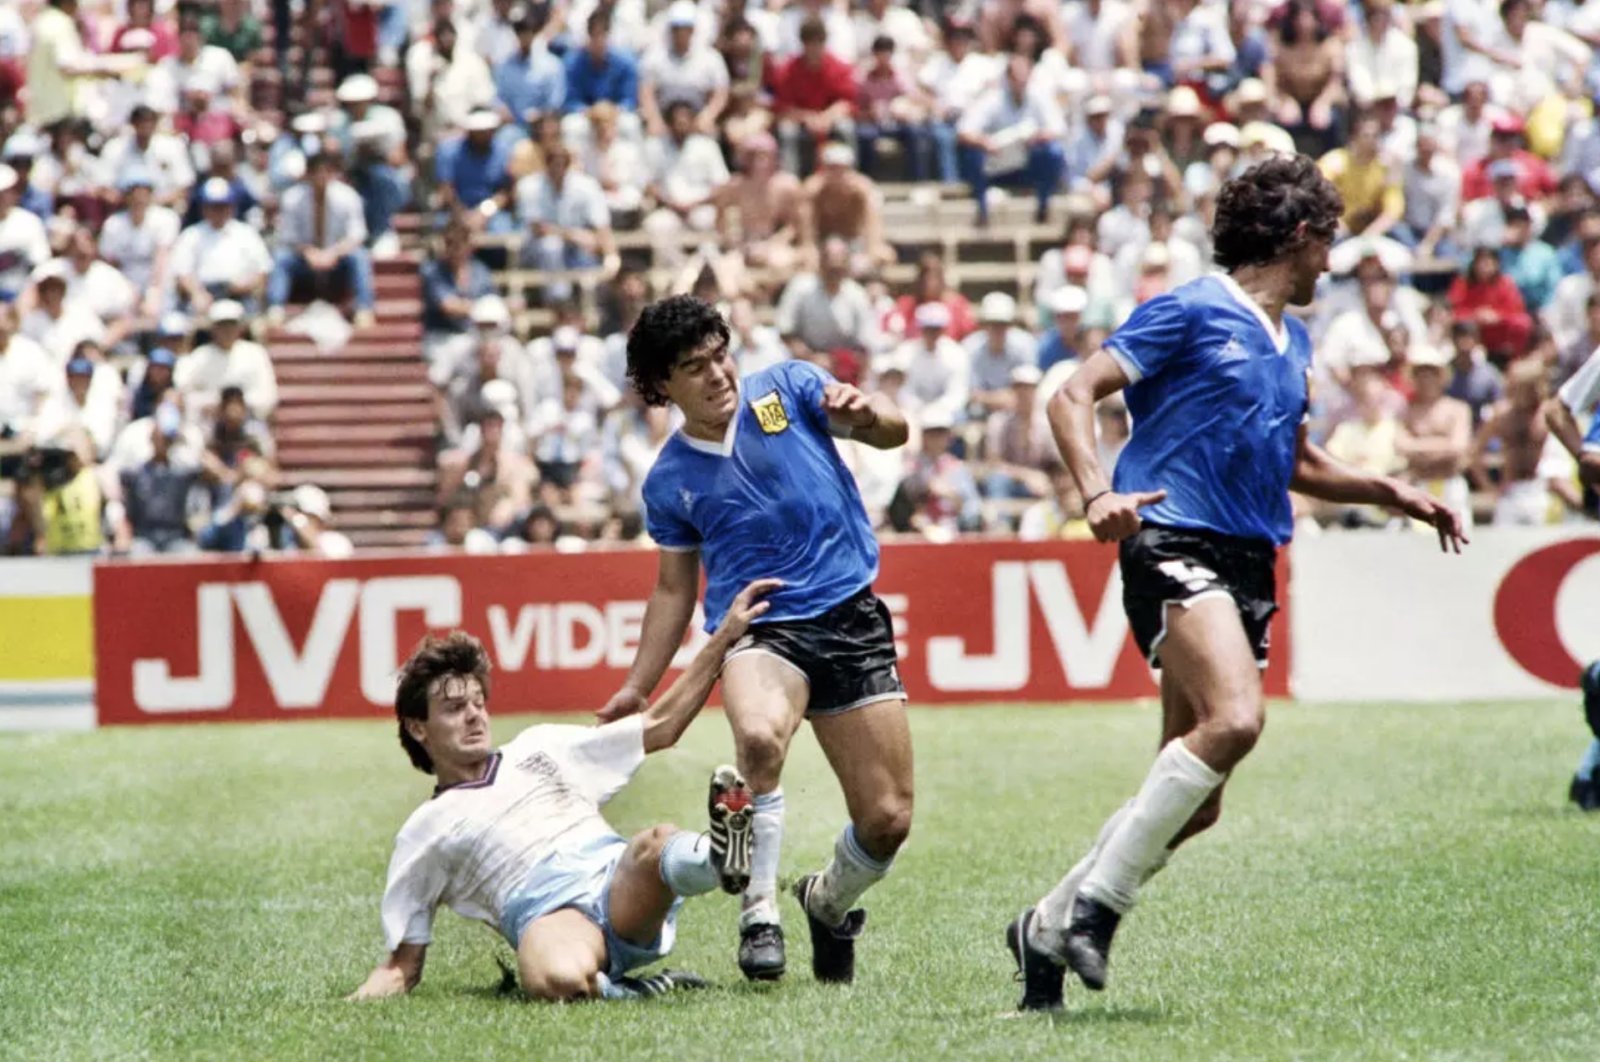 England's Hodge tackles Maradona during the famous 1986 World Cup match at Mexico City's Estadio Azteca on June 22, 1986 (AFP Photo)